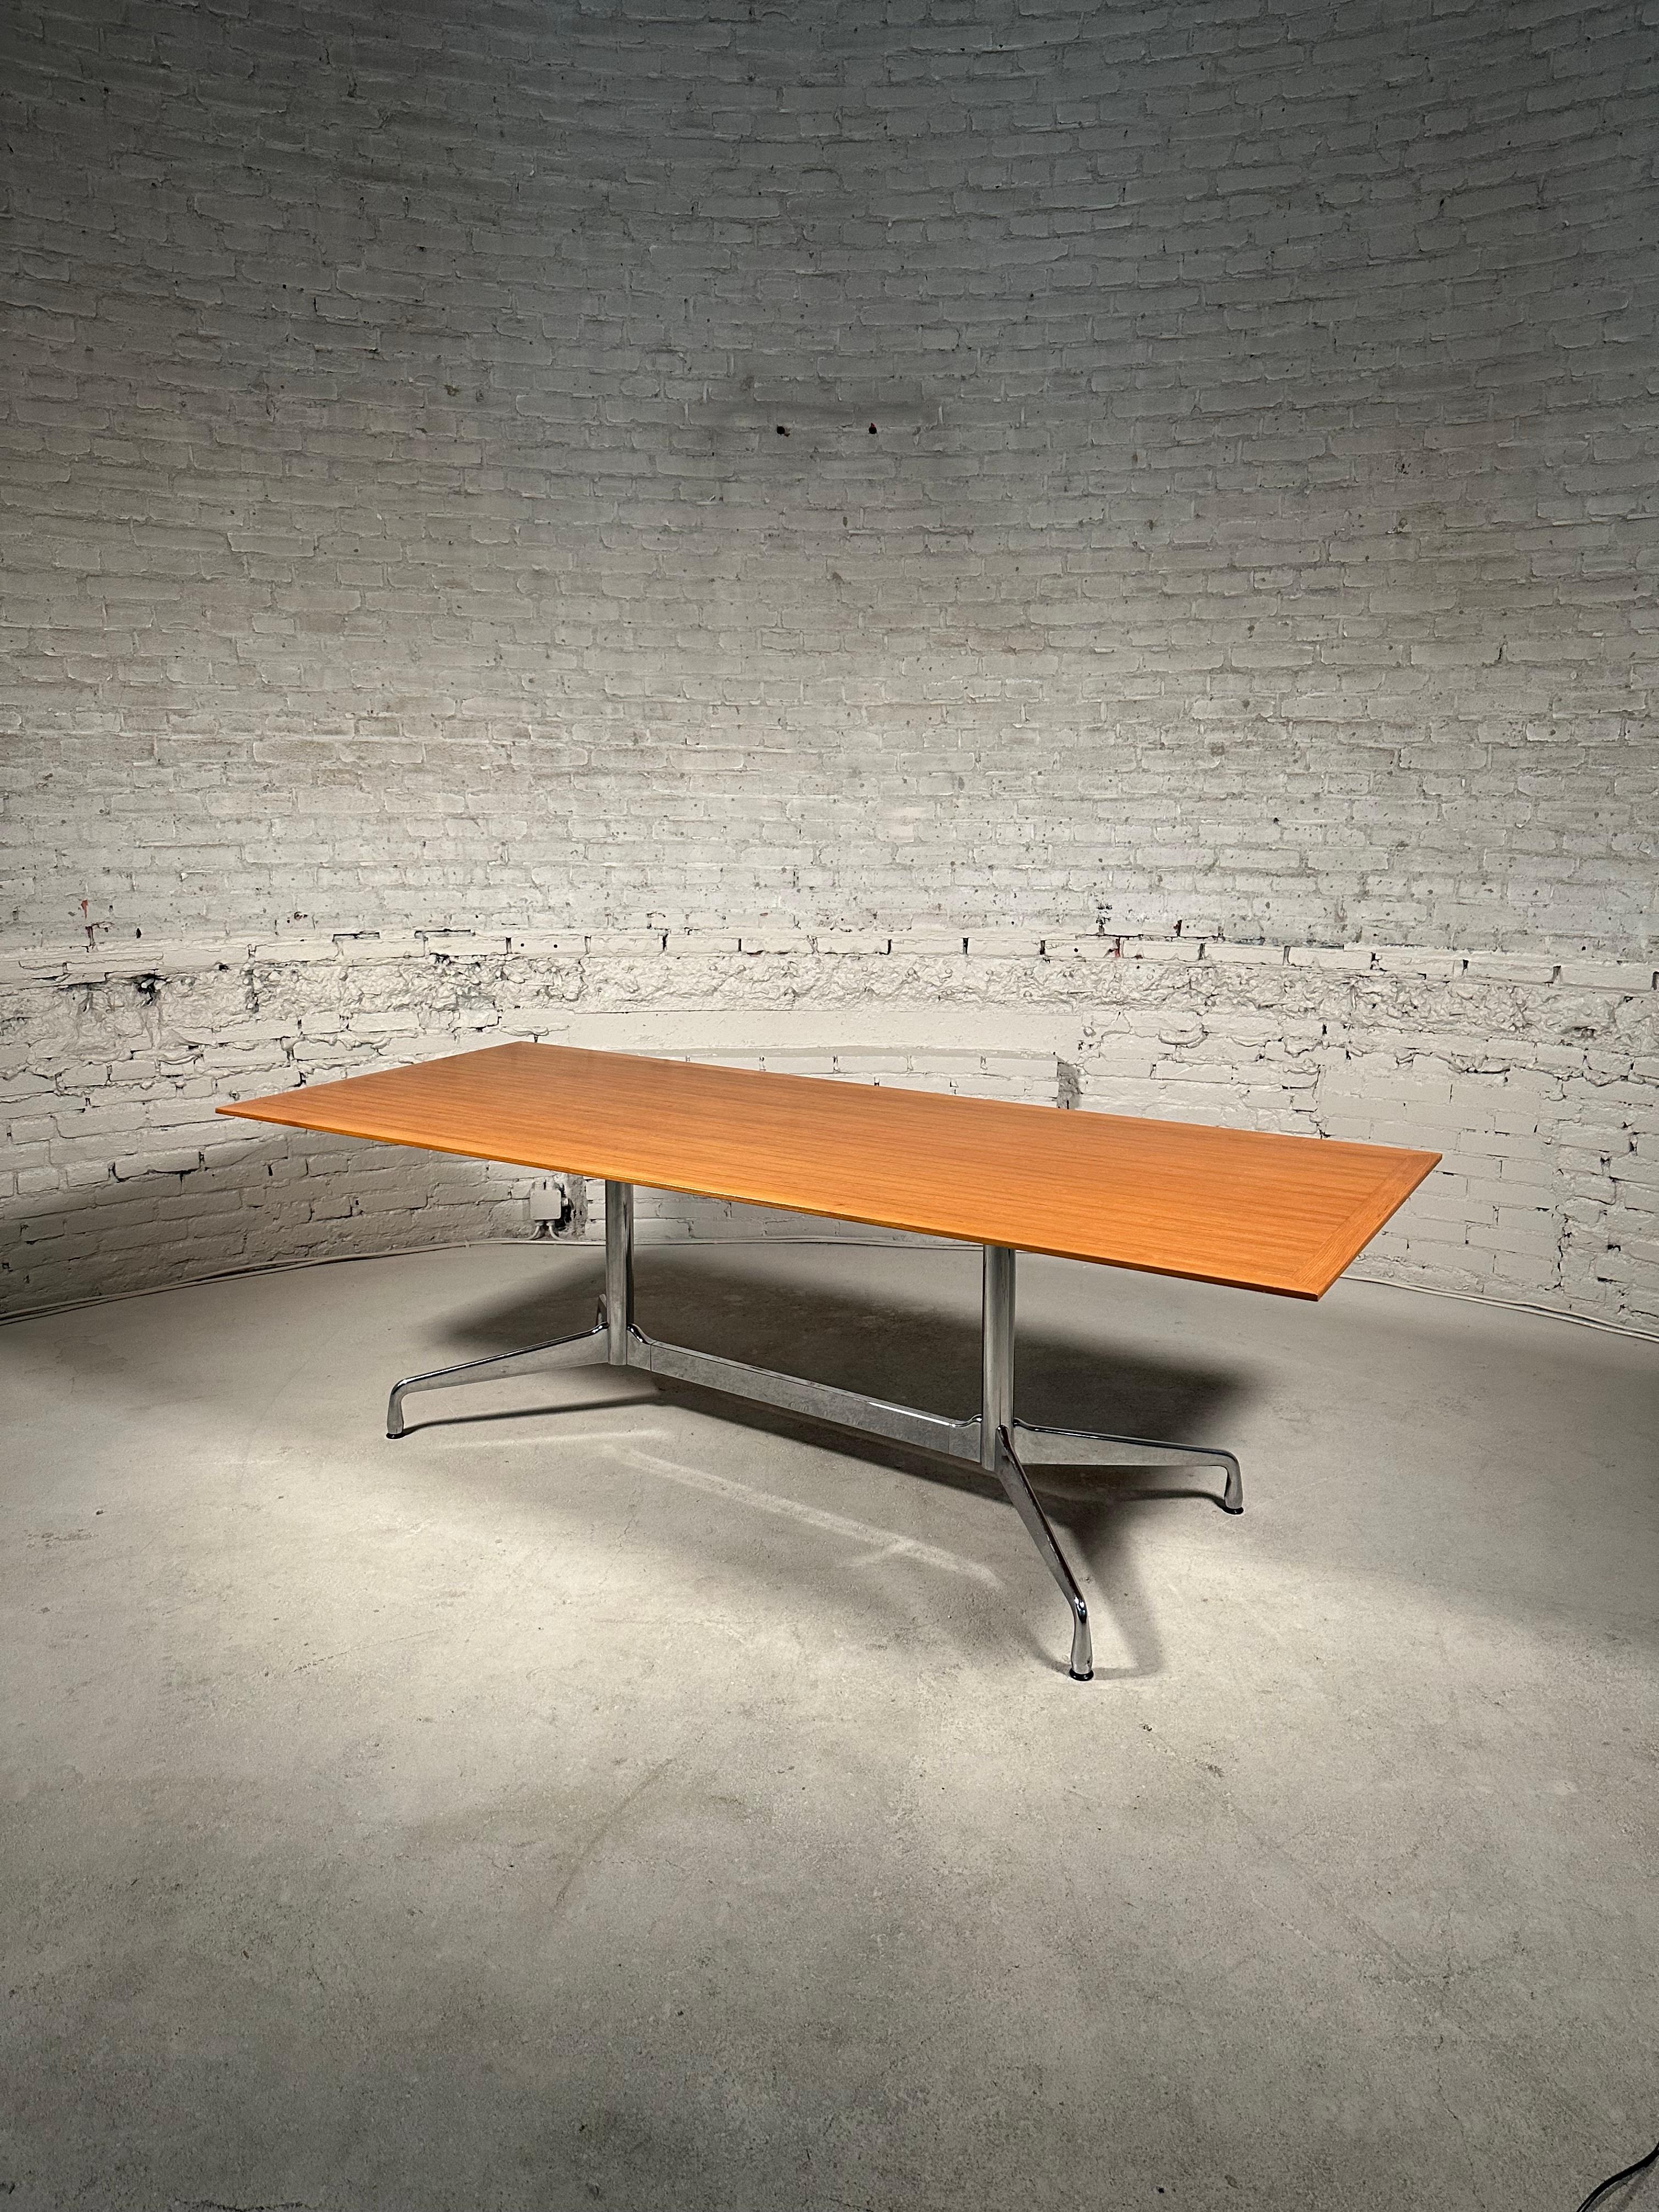 Spacious Charles & Ray Eames Segmented Base conference table manufactured by Vitra in the 90's. The table features a stunning beech book-matched veneer tabletop in a single piece, identified by its production date label. The base is labeled with